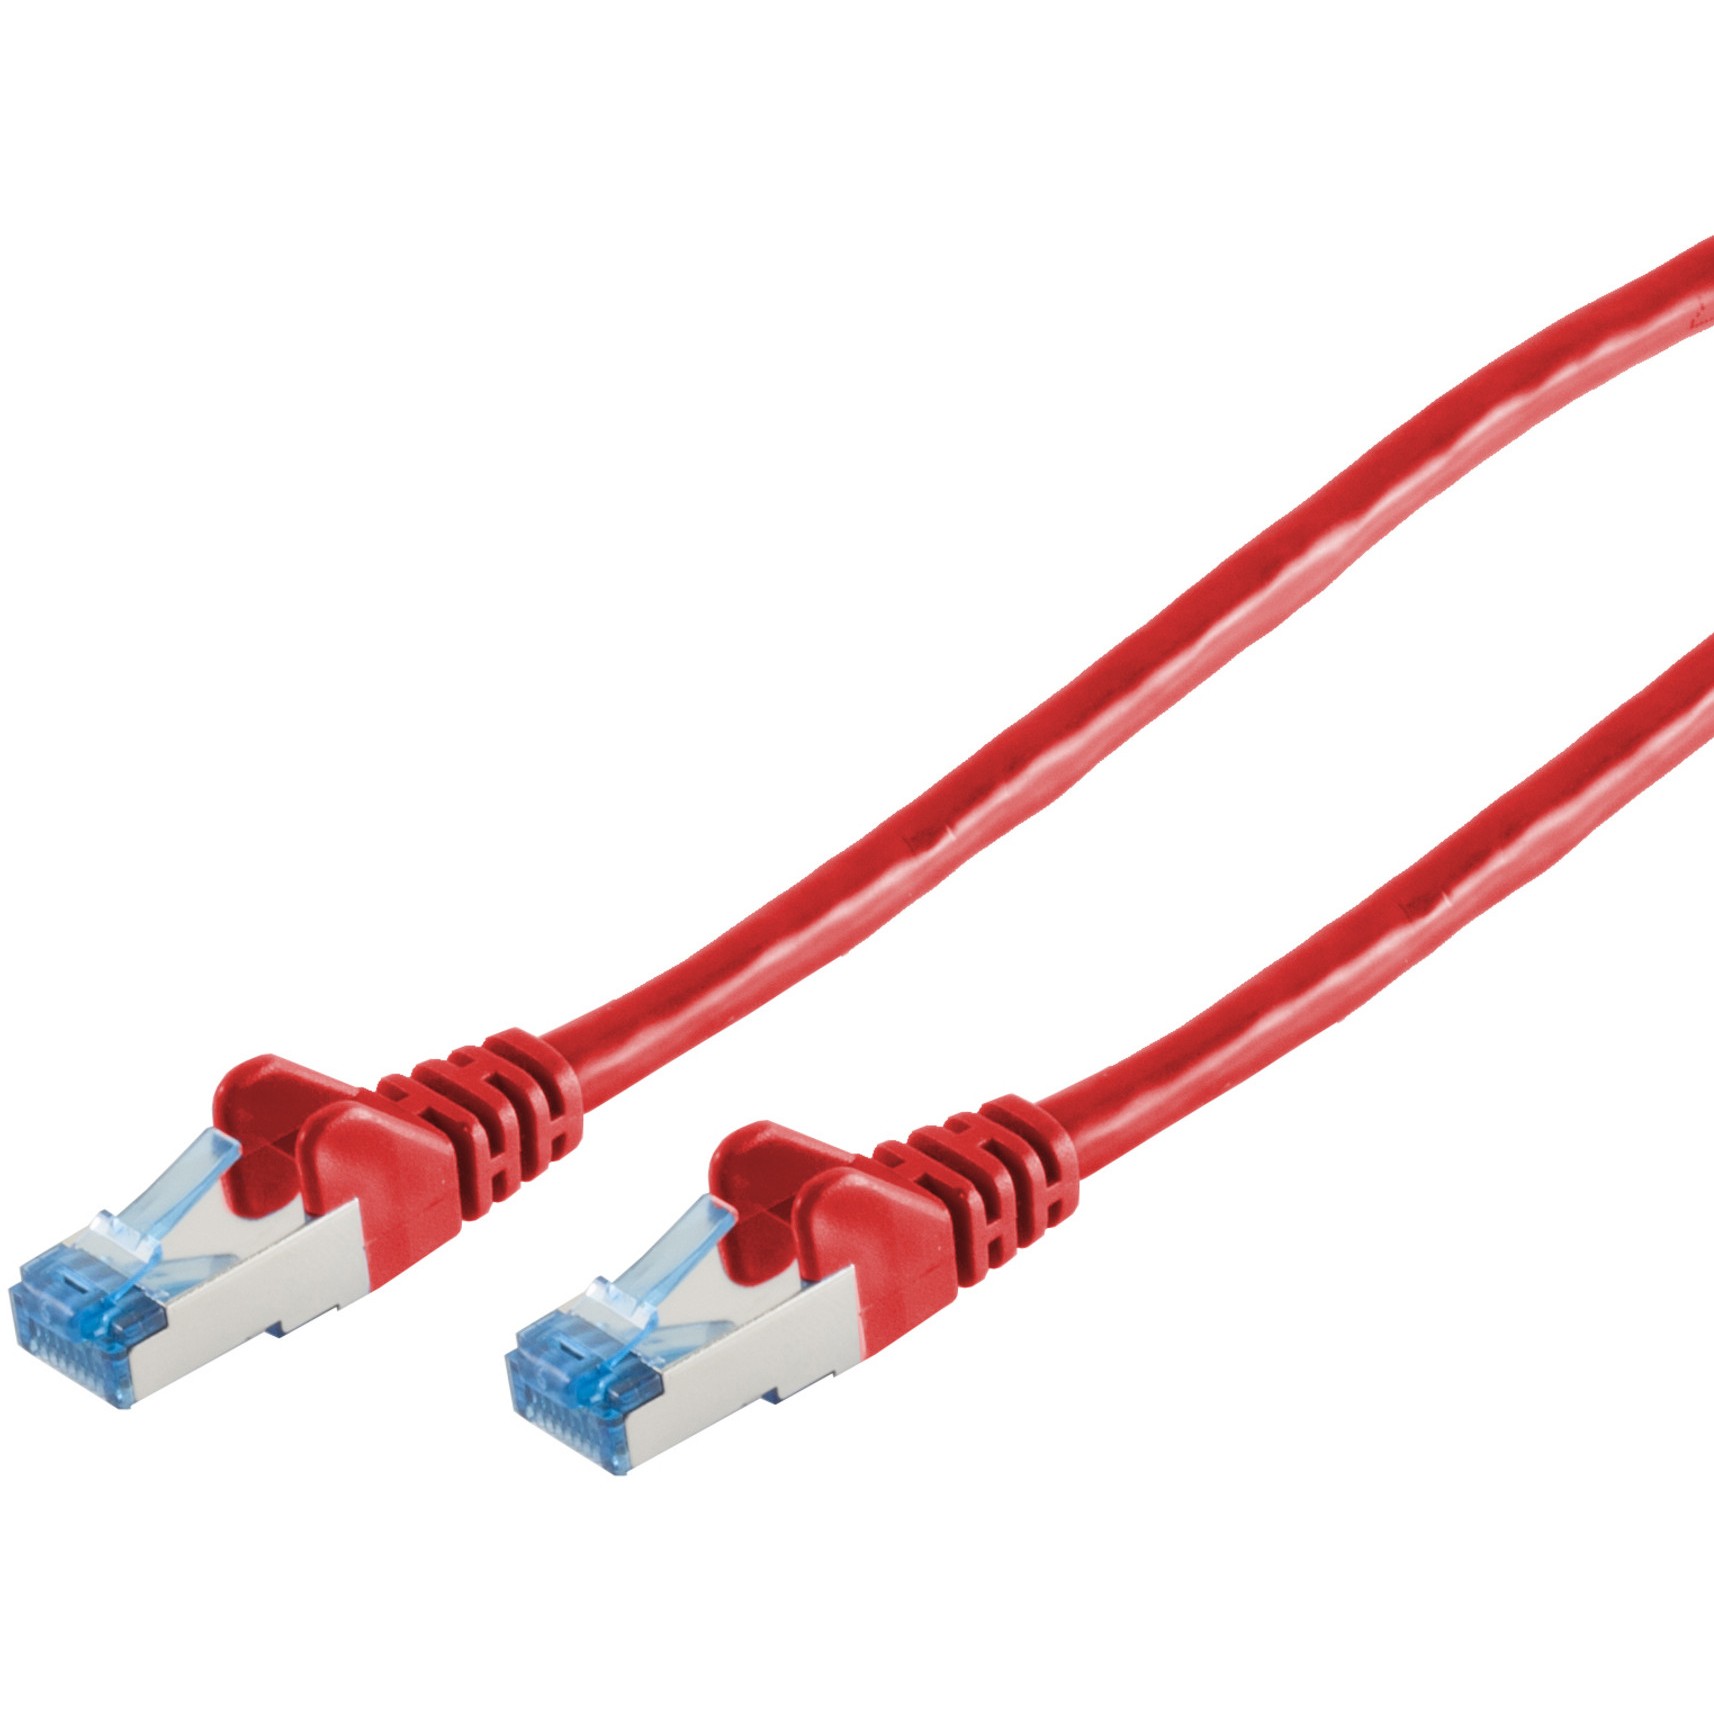 S-Conn 75715-R networking cable - 75715-R